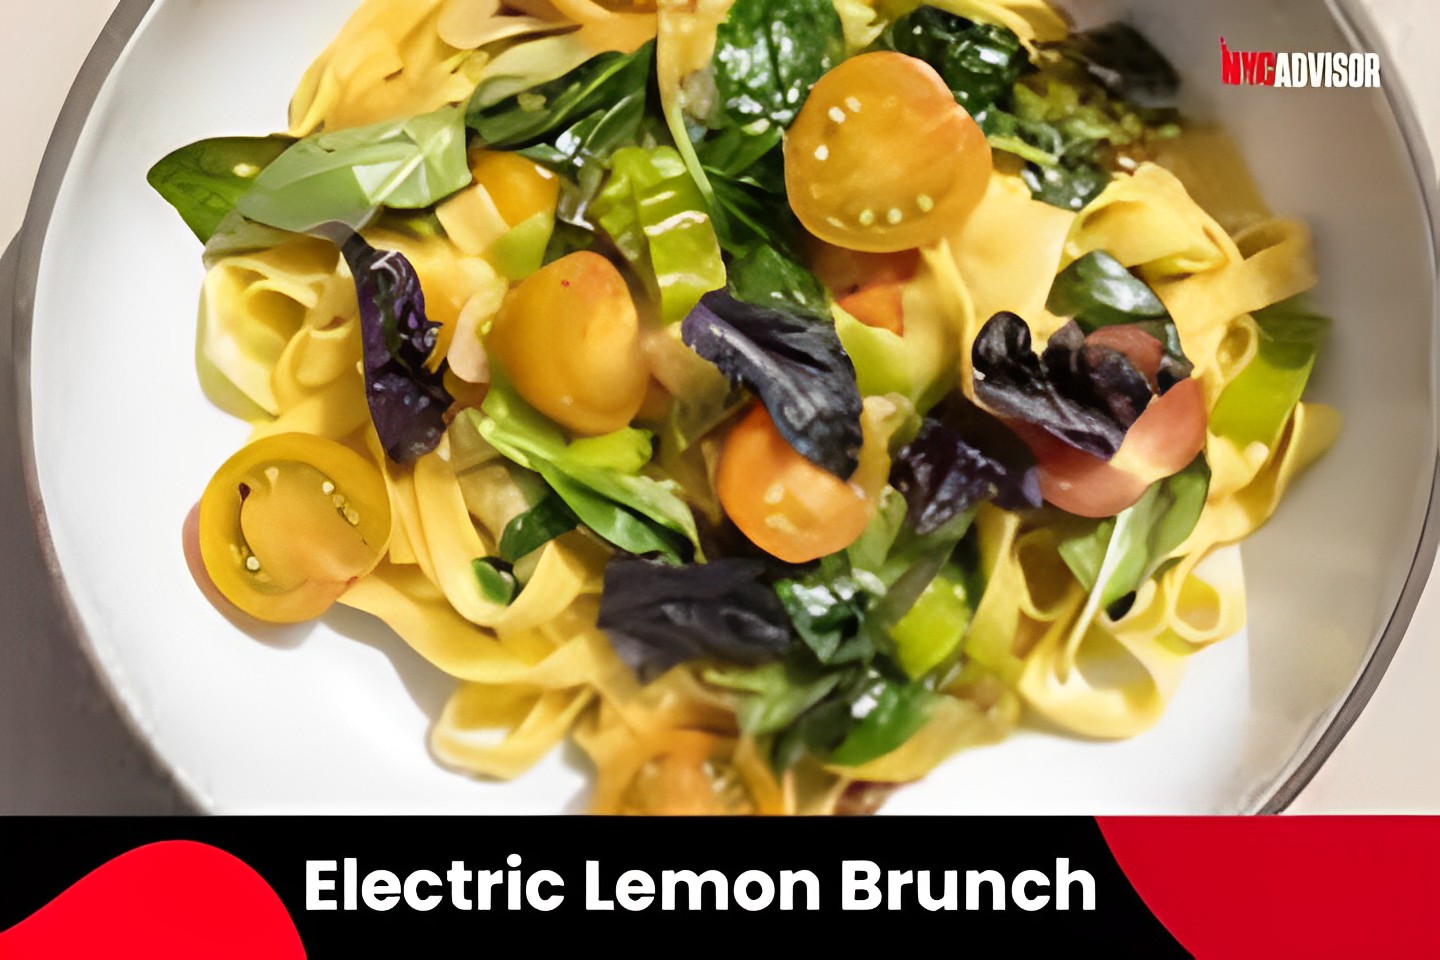 The Electric Lemon Brunch in NYC